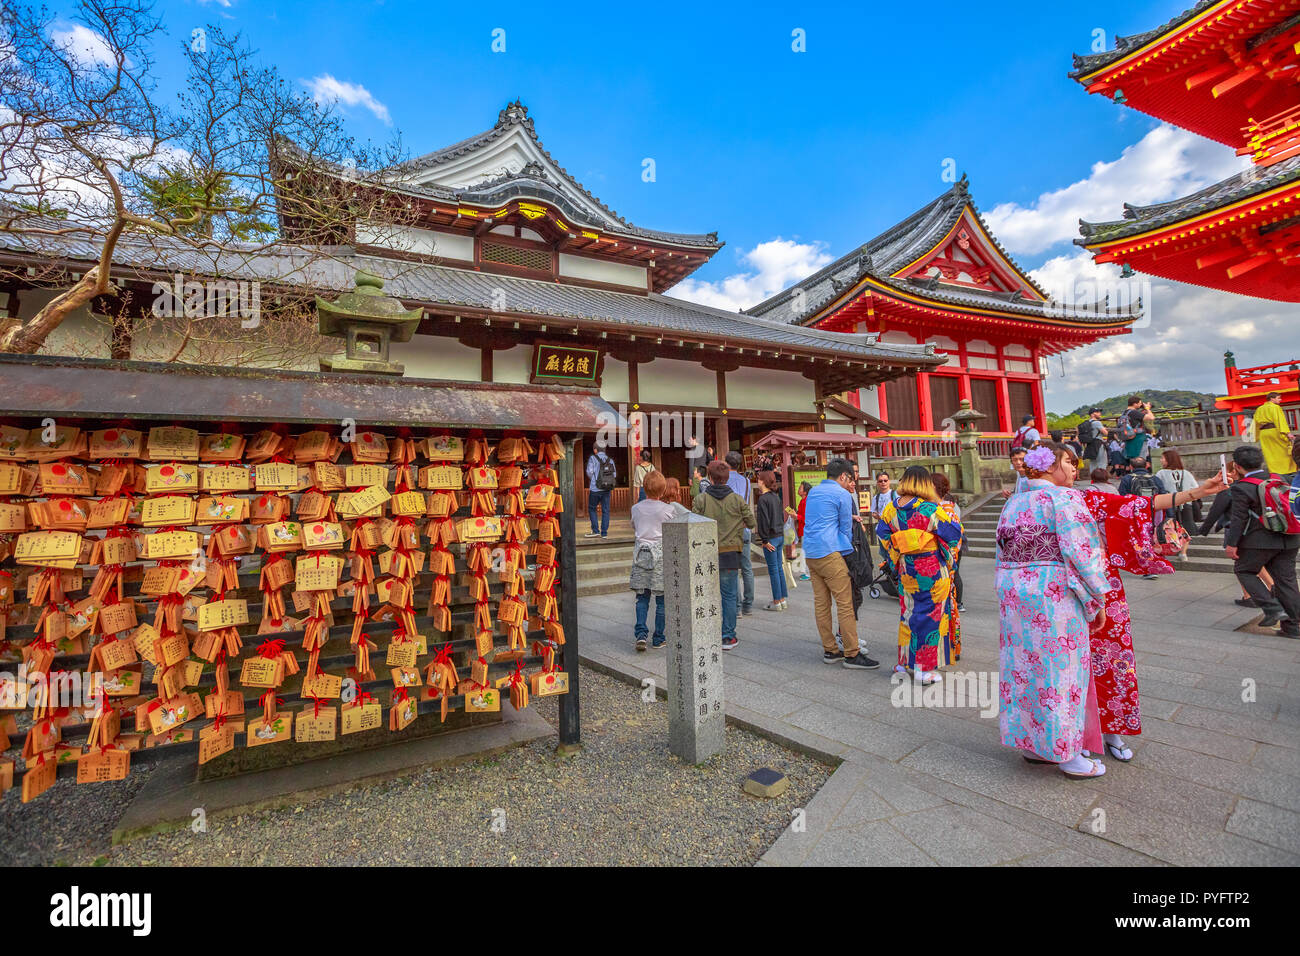 Kyoto, Japan - April 24, 2017: wooden plaques or Ema, bearing people's prayerspeople, women in kimonos takes selfie and red pagoda inside Kiyomizu-dera, one of the most celebrated temples of Japan. Stock Photo